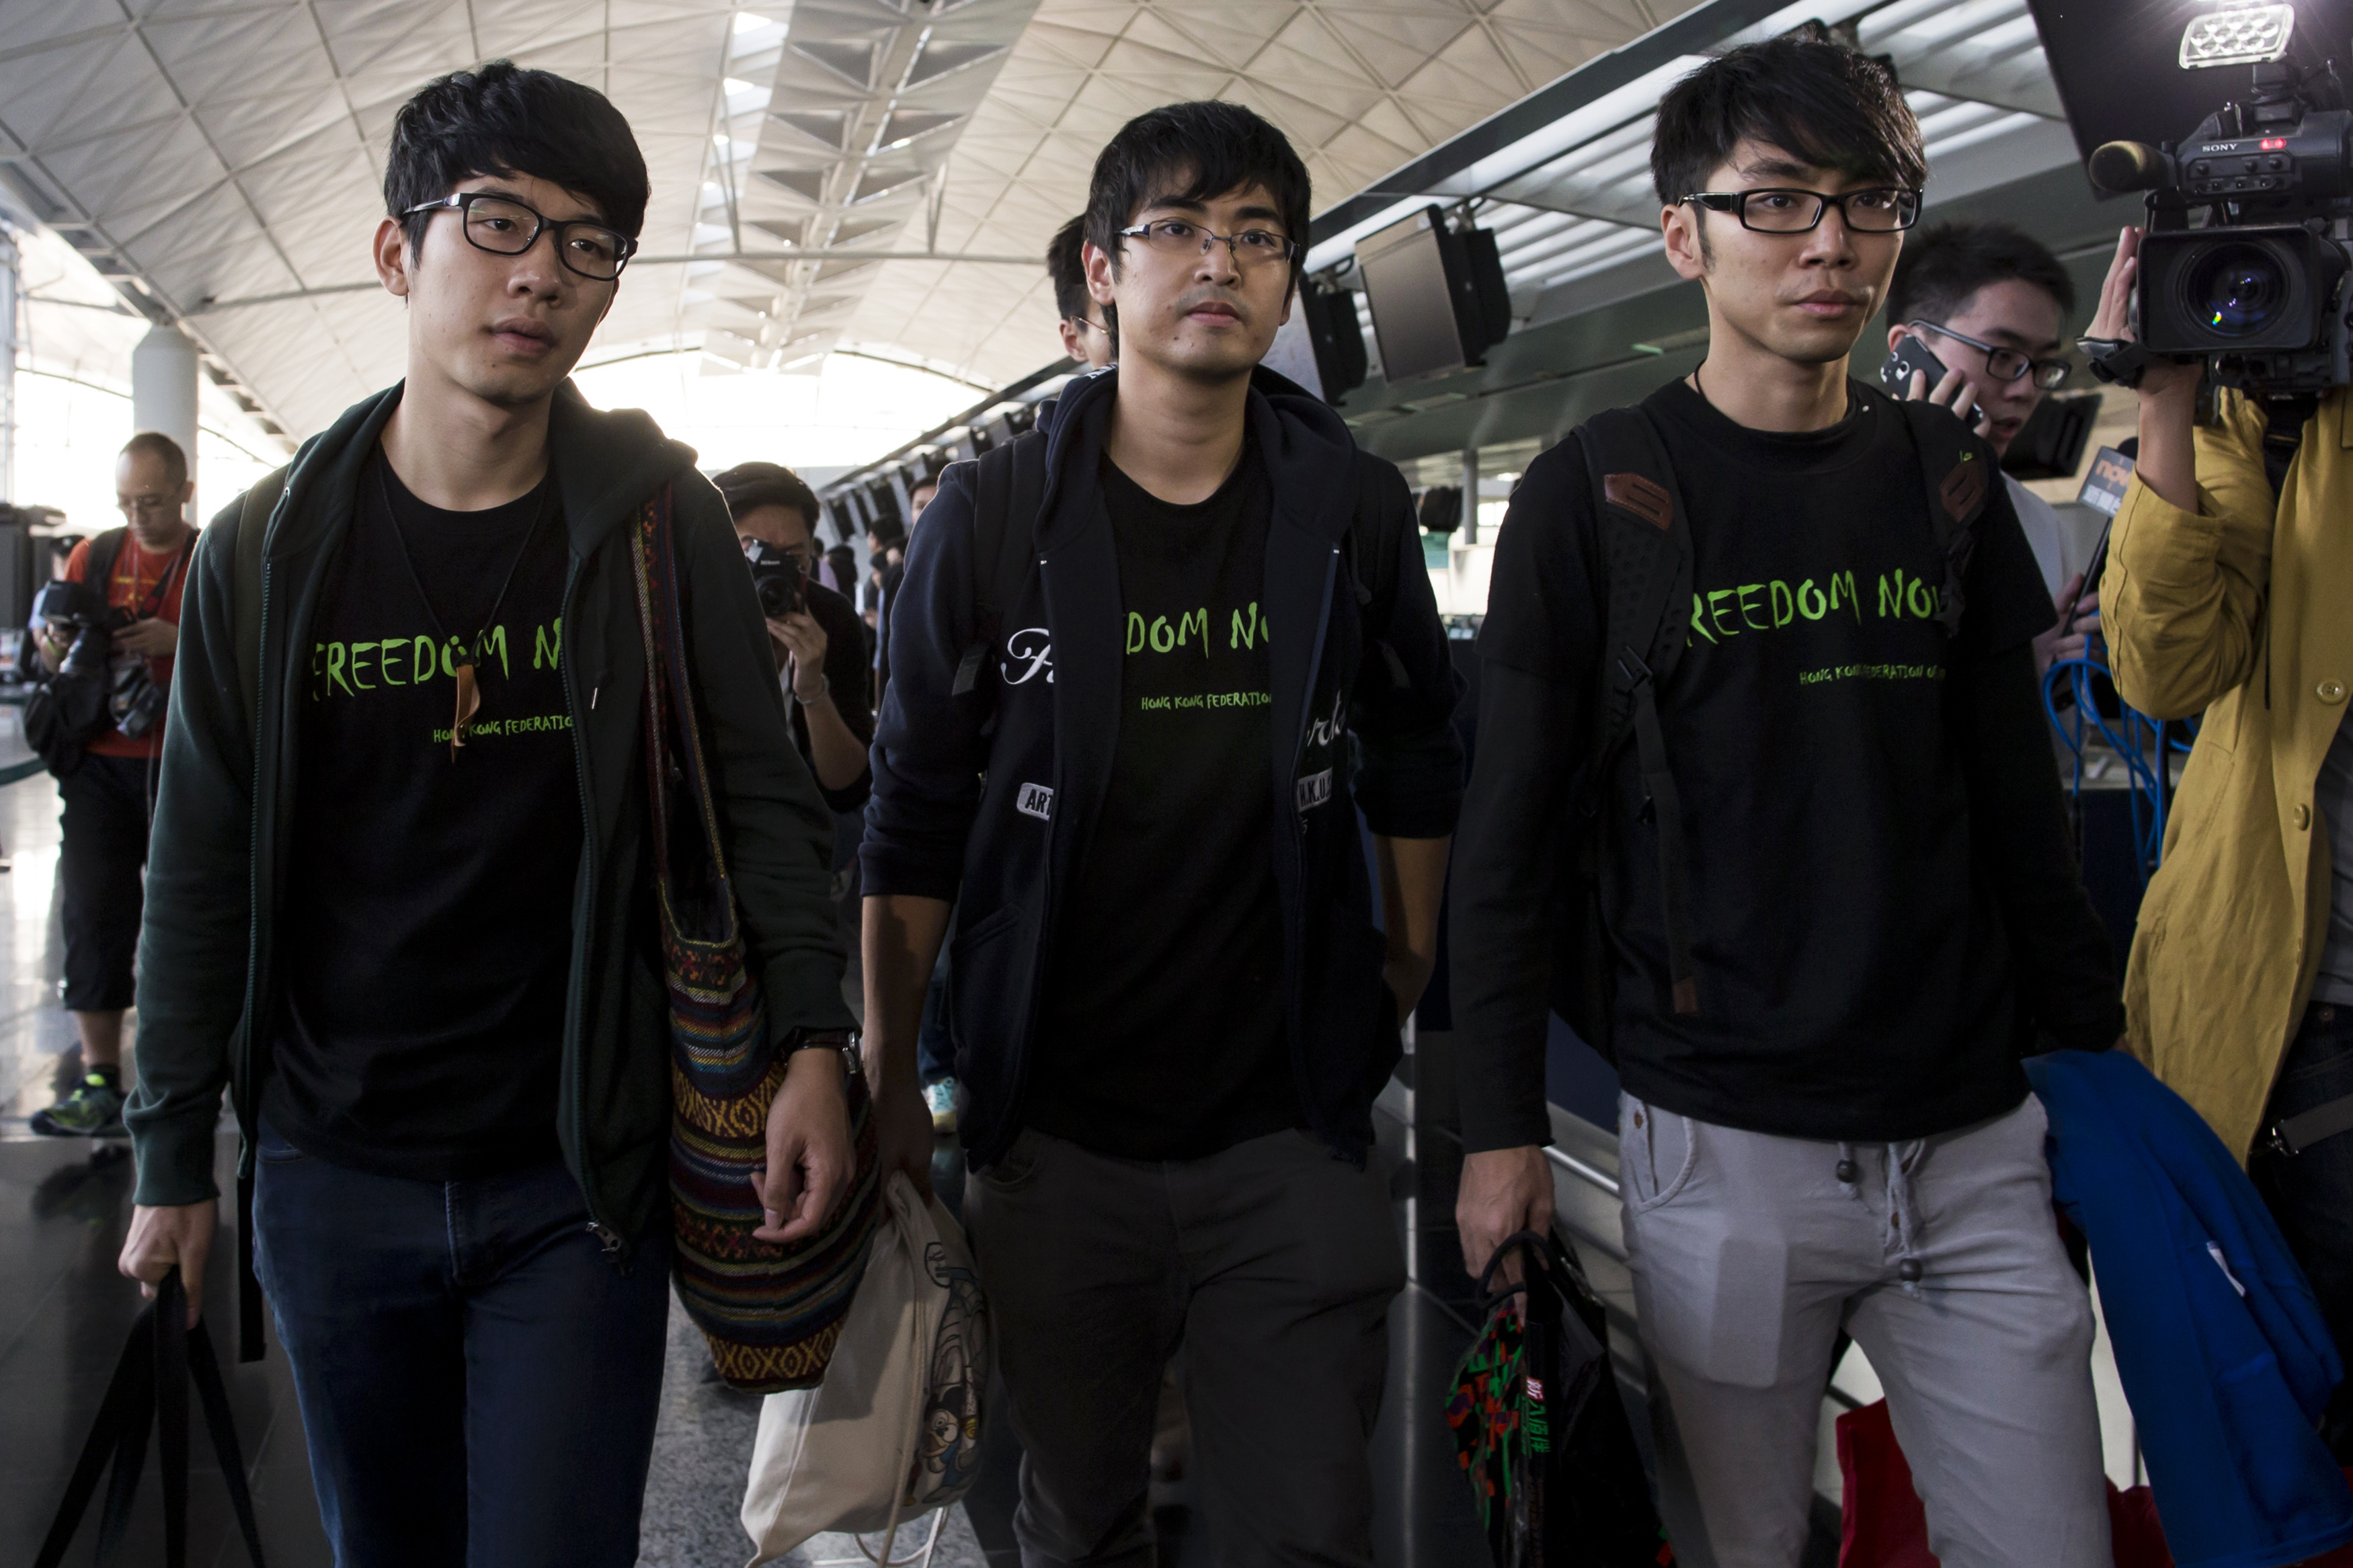 Hong Kong Federation of Students leader Alex Chow, committee members Nathan Law and Eason Chung react after being refused to board the plane at the Hong Kong International Airport